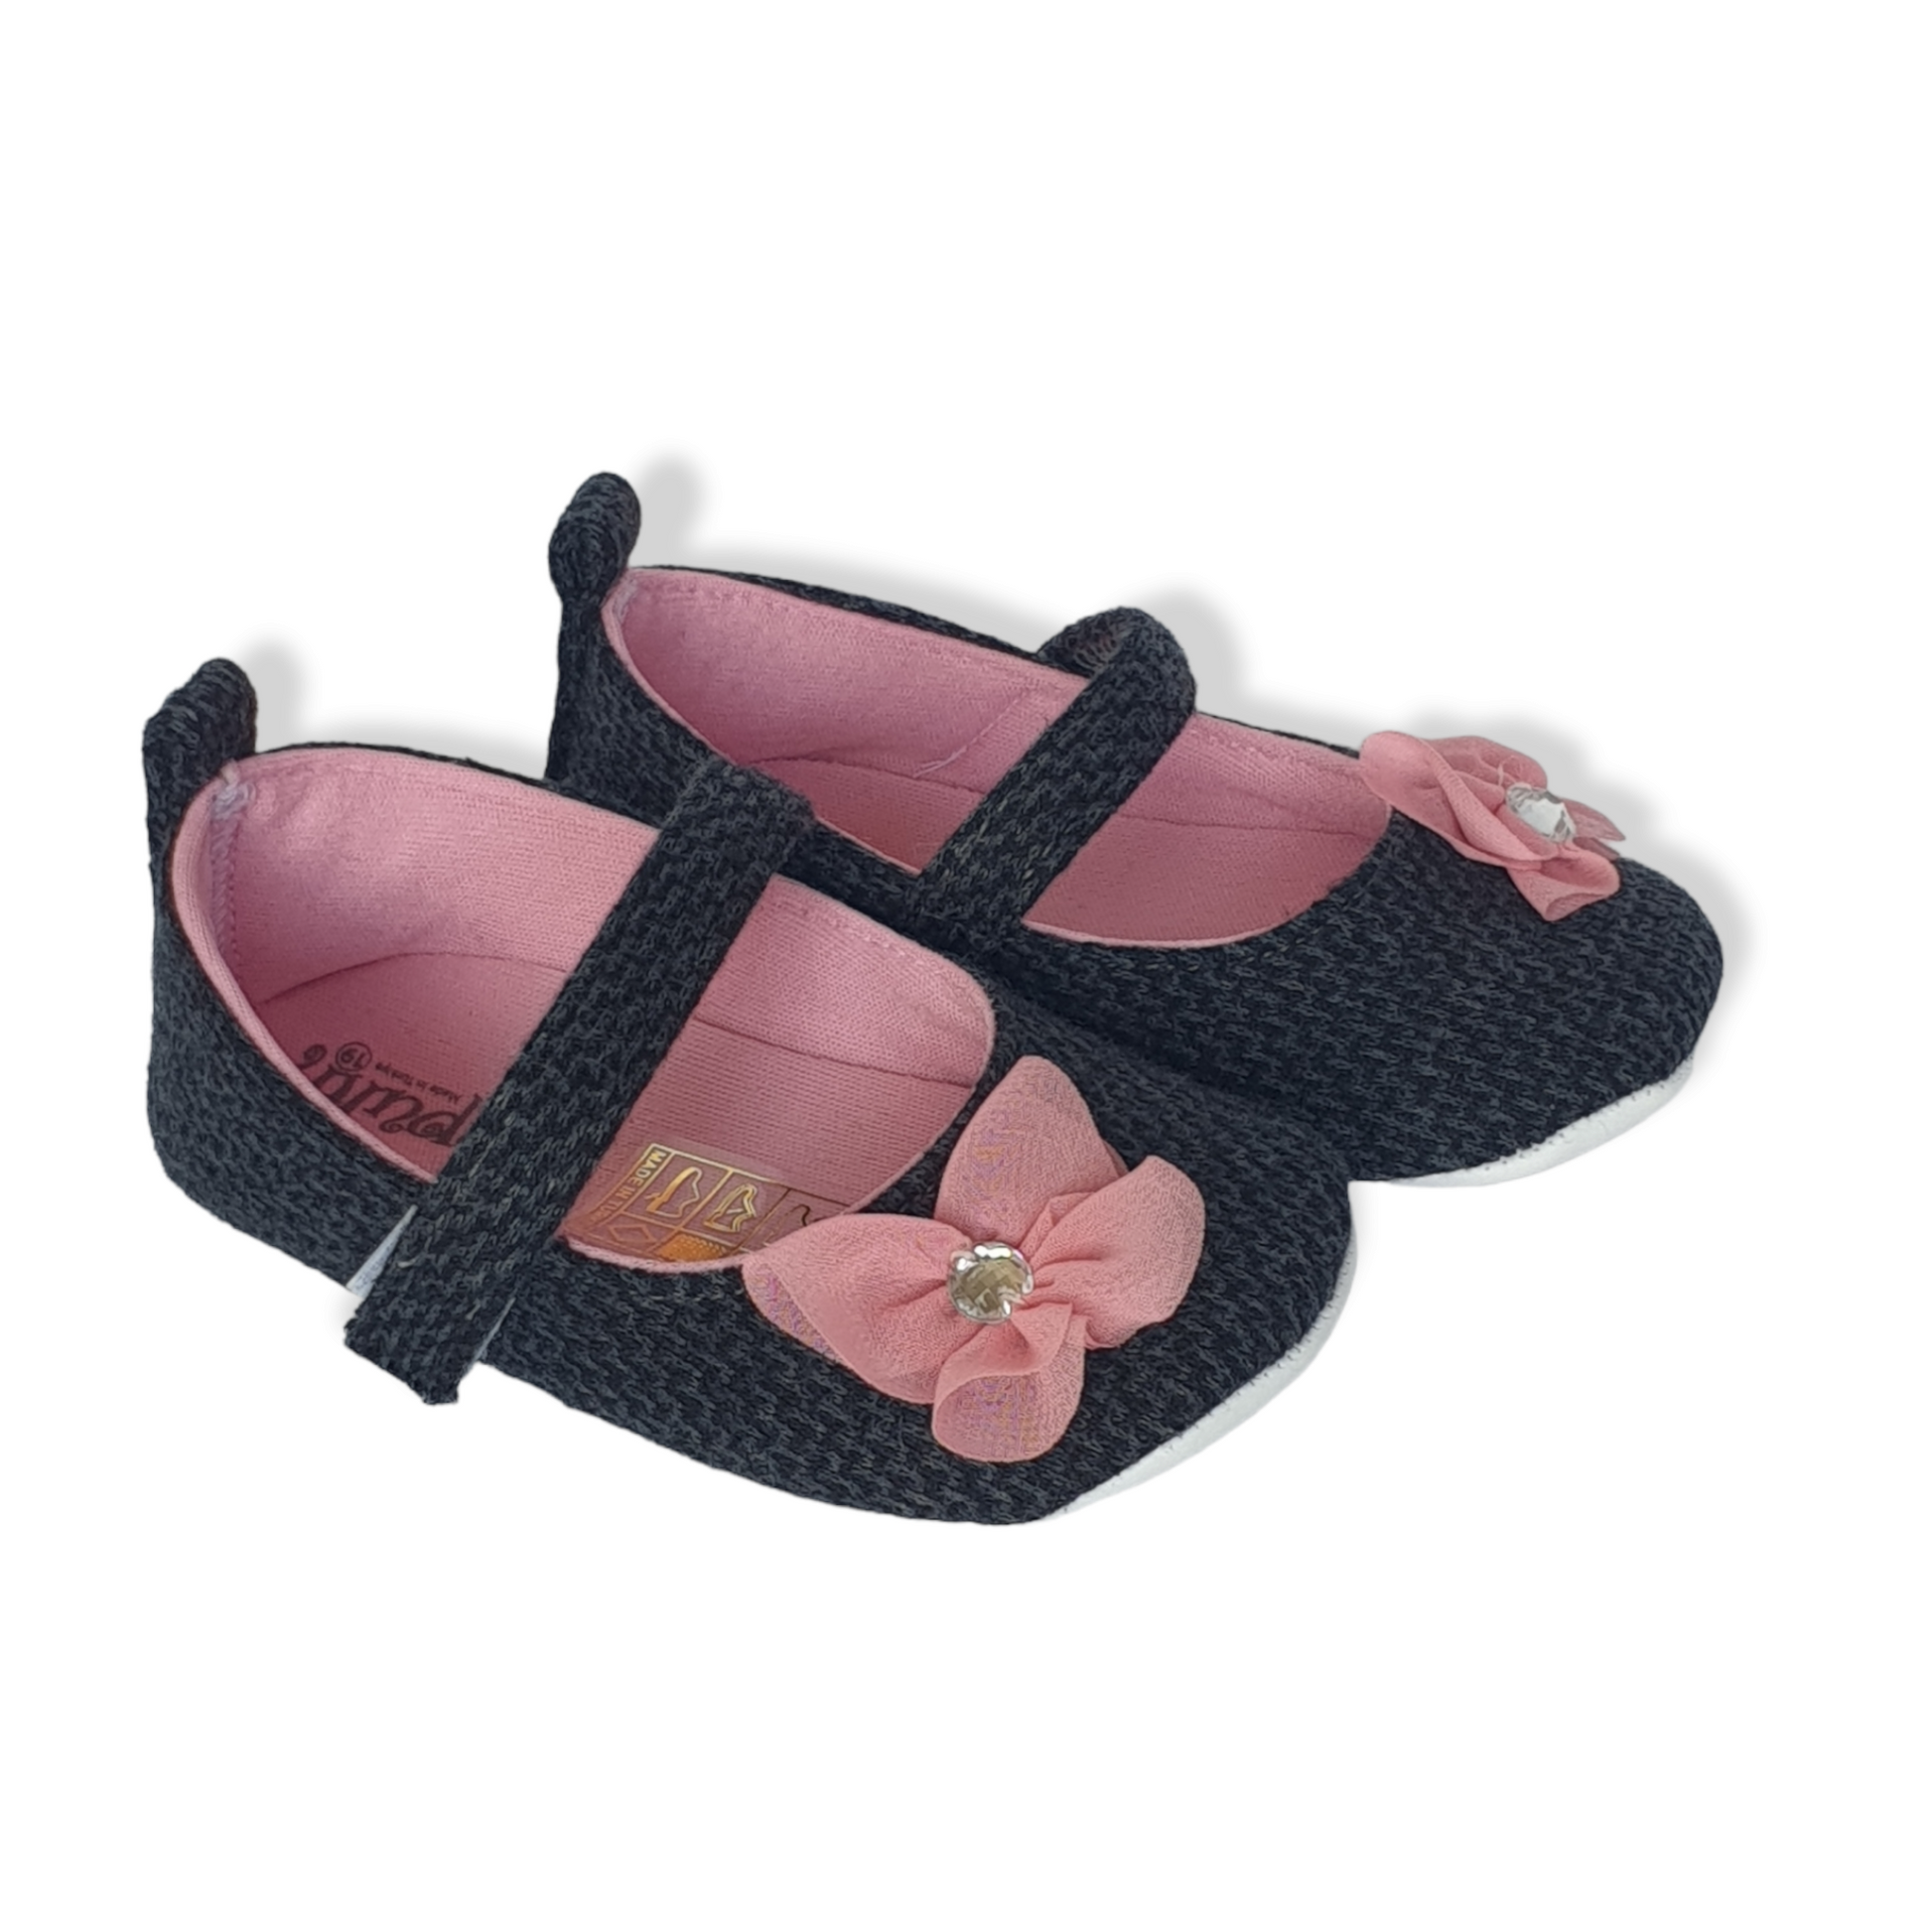 Black Ballerinas Baby Shoes-Baby shoe, Ballerina, Ballerinas, Ballerine, Black, Boots, catgirl, catshoes, Shoe, Shoes-Papulin-[Too Twee]-[Tootwee]-[baby]-[newborn]-[clothes]-[essentials]-[toys]-[Lebanon]